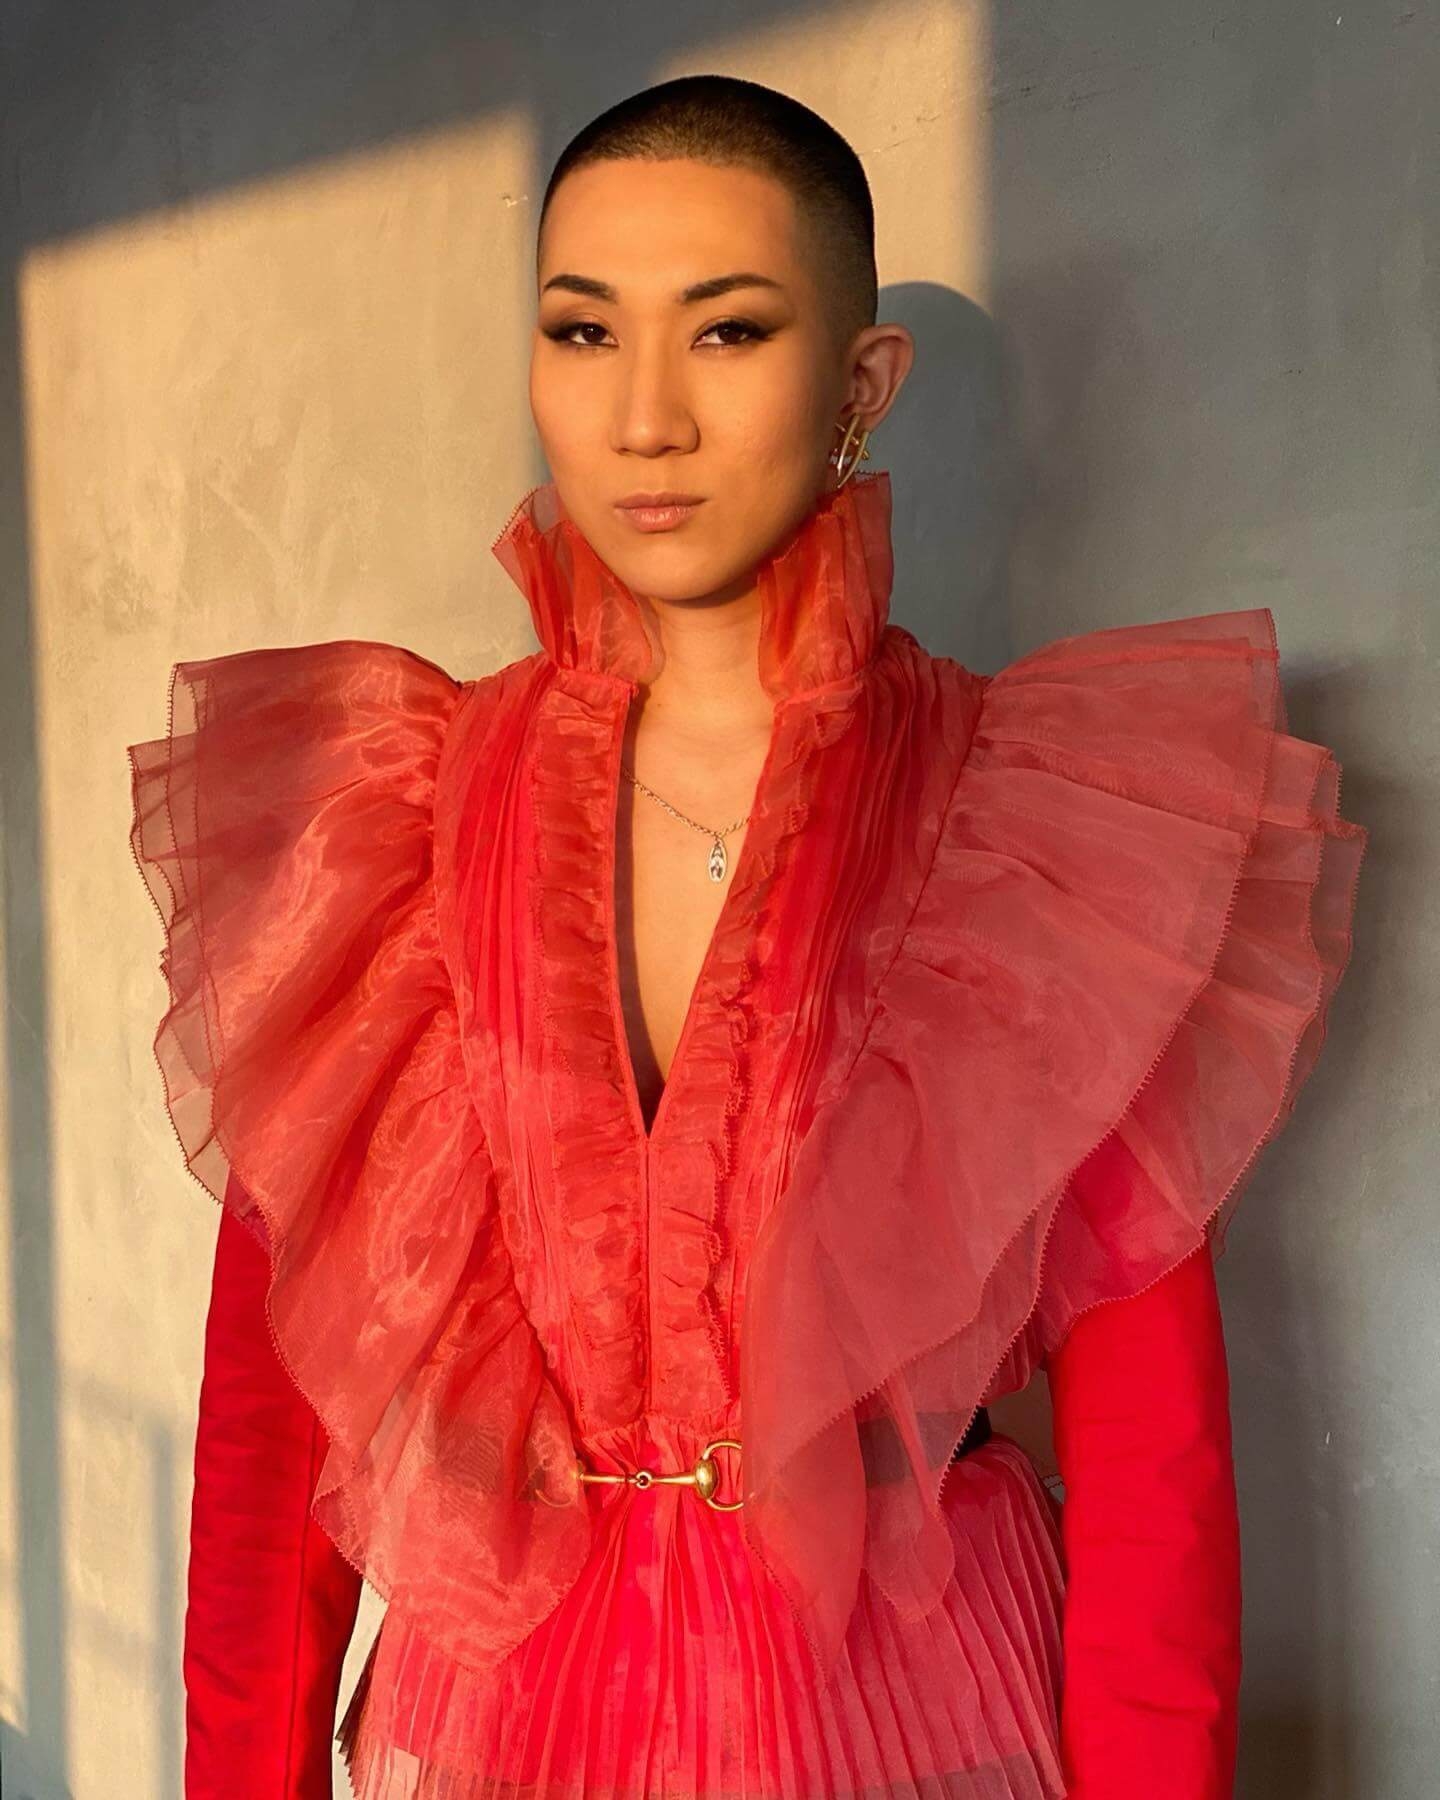 kodo kodo nishimura buddhist monk lgbtqia activist and make up artist will be doing a series of talks and workshops at pantechnicon in london in march